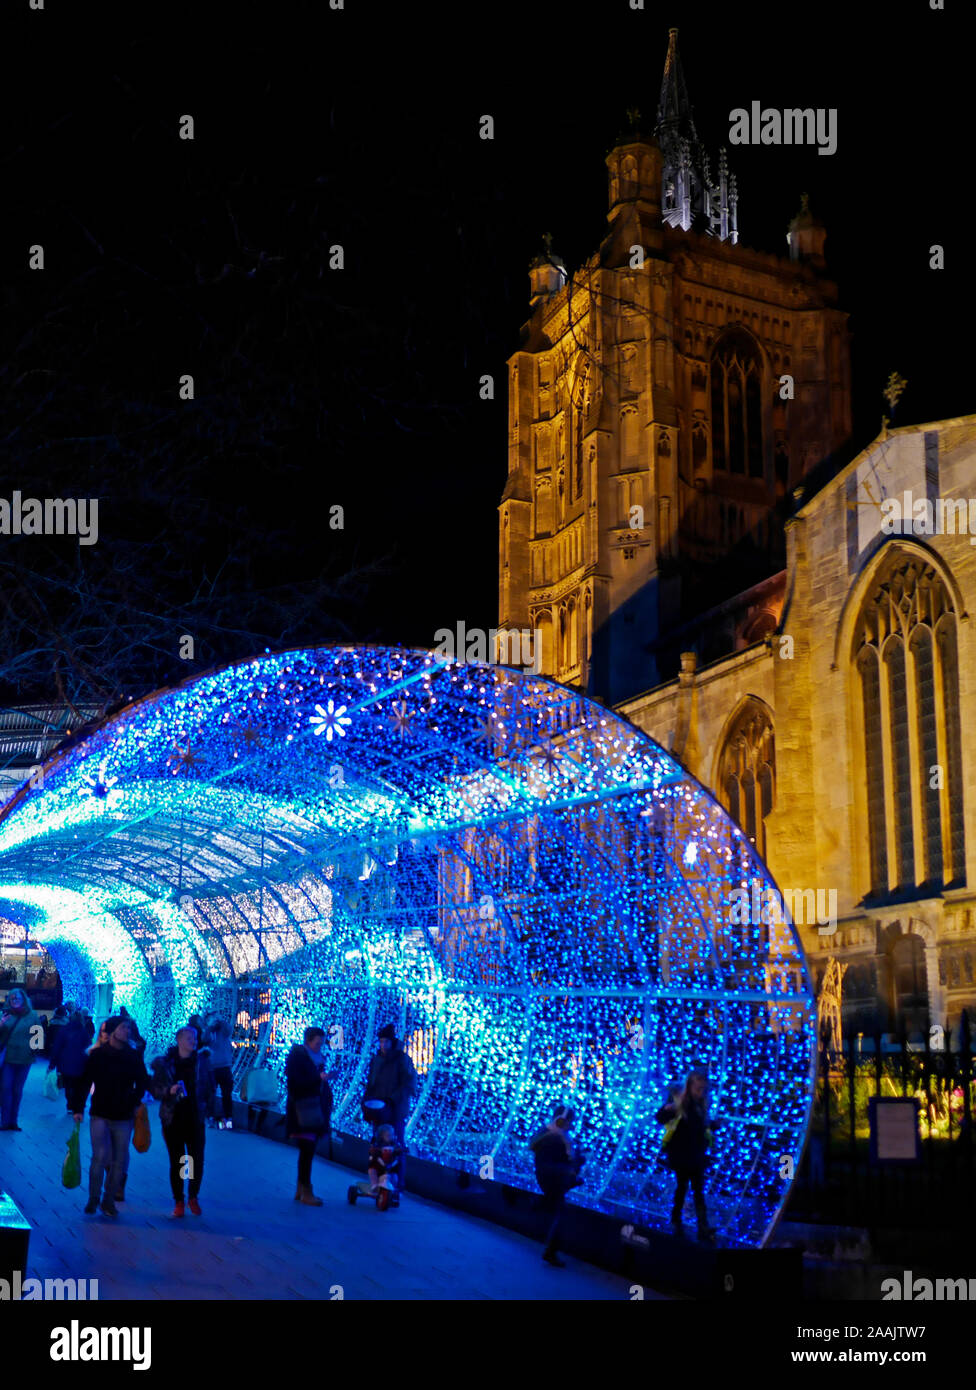 The Tunnel of Light, Christmas Illumination, Northern Lights Experience, in Norwich, Norfolk, England, UK Stock Photo